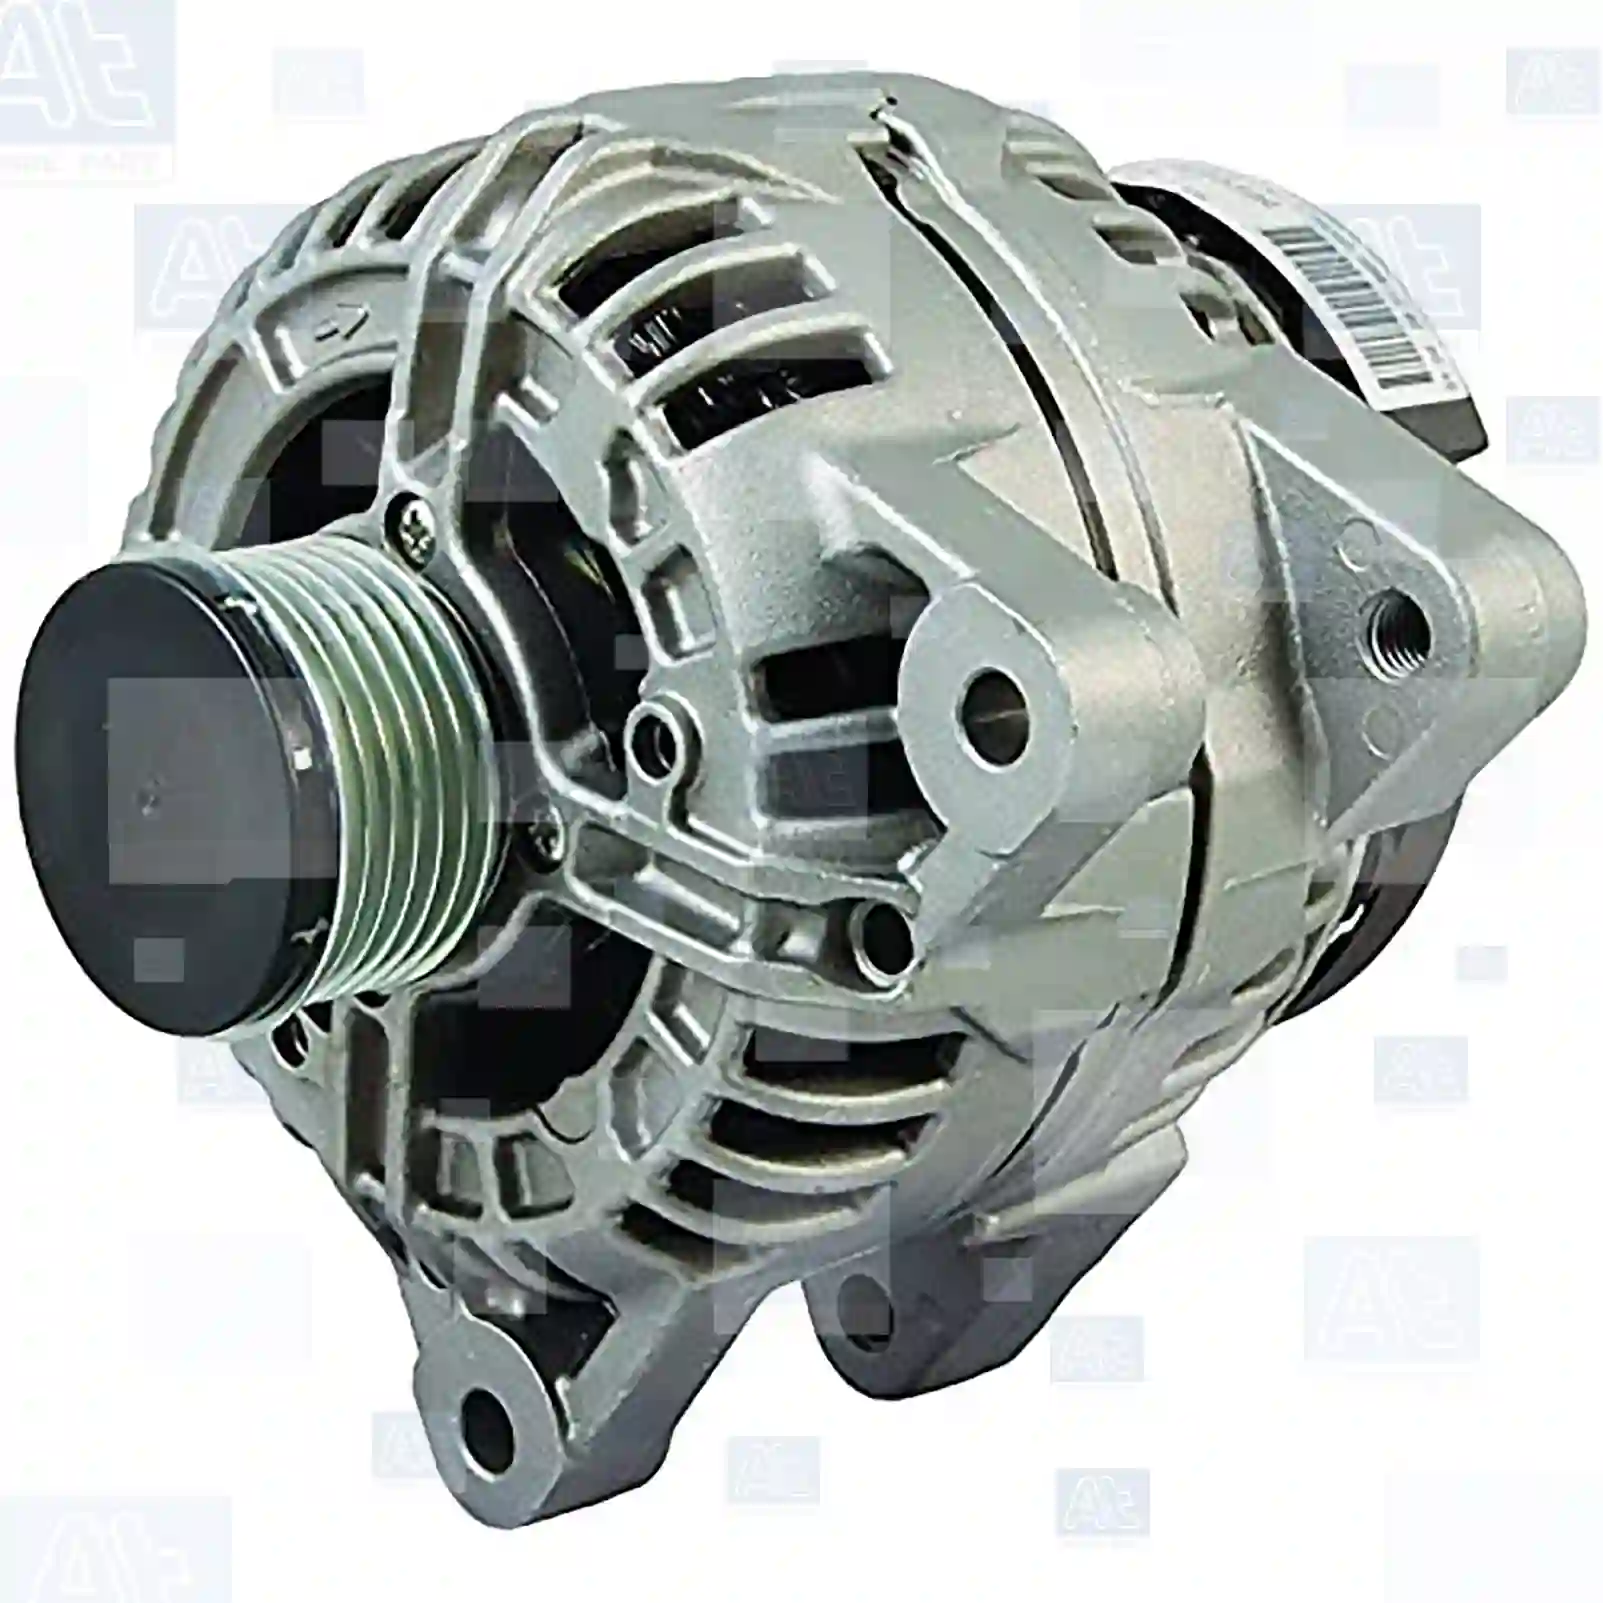 Alternator, at no 77711564, oem no: 7794970, 5702AG, 5702AR, 5702AS, 5702C2, 5702E0, 5702E1, 5702E2, 5702E3, 5702EX, 5702EY, 5702NH, 5705AG, 5705AR, 5705AS, 5705ES, 5705EX, 5705EY, 5705NH, 9644037180, 9644103580, 9646065480, 9646065488, 9646321780, 9646321880, 9650358580, 9665617780, 71732307, 71733552, 9646065480, 07794970, 71732307, 71733552, 71783849, 71784025, 71794294, 9644037180, 9644103580, 9646065480, 9646065488, 9646321780, 9646321880, 9650358580, 71732307, 71733552, 71783849, 71784025, 71794294, 9646065480, 5702AG, 5702AR, 5702AS, 5702C2, 5702E0, 5702E1, 5702E2, 5702E3, 5702EX, 5702EY, 5702NH, 5705AG, 5705AR, 5705AS, 5705ES, 5705EX, 5705EY, 5705NH, 9644037180, 9644103580, 9646065480, 9646065488, 9646321780, 9646321880, 9650358580, 9665617780, 31400-69K00, 31400-69K00-000 At Spare Part | Engine, Accelerator Pedal, Camshaft, Connecting Rod, Crankcase, Crankshaft, Cylinder Head, Engine Suspension Mountings, Exhaust Manifold, Exhaust Gas Recirculation, Filter Kits, Flywheel Housing, General Overhaul Kits, Engine, Intake Manifold, Oil Cleaner, Oil Cooler, Oil Filter, Oil Pump, Oil Sump, Piston & Liner, Sensor & Switch, Timing Case, Turbocharger, Cooling System, Belt Tensioner, Coolant Filter, Coolant Pipe, Corrosion Prevention Agent, Drive, Expansion Tank, Fan, Intercooler, Monitors & Gauges, Radiator, Thermostat, V-Belt / Timing belt, Water Pump, Fuel System, Electronical Injector Unit, Feed Pump, Fuel Filter, cpl., Fuel Gauge Sender,  Fuel Line, Fuel Pump, Fuel Tank, Injection Line Kit, Injection Pump, Exhaust System, Clutch & Pedal, Gearbox, Propeller Shaft, Axles, Brake System, Hubs & Wheels, Suspension, Leaf Spring, Universal Parts / Accessories, Steering, Electrical System, Cabin Alternator, at no 77711564, oem no: 7794970, 5702AG, 5702AR, 5702AS, 5702C2, 5702E0, 5702E1, 5702E2, 5702E3, 5702EX, 5702EY, 5702NH, 5705AG, 5705AR, 5705AS, 5705ES, 5705EX, 5705EY, 5705NH, 9644037180, 9644103580, 9646065480, 9646065488, 9646321780, 9646321880, 9650358580, 9665617780, 71732307, 71733552, 9646065480, 07794970, 71732307, 71733552, 71783849, 71784025, 71794294, 9644037180, 9644103580, 9646065480, 9646065488, 9646321780, 9646321880, 9650358580, 71732307, 71733552, 71783849, 71784025, 71794294, 9646065480, 5702AG, 5702AR, 5702AS, 5702C2, 5702E0, 5702E1, 5702E2, 5702E3, 5702EX, 5702EY, 5702NH, 5705AG, 5705AR, 5705AS, 5705ES, 5705EX, 5705EY, 5705NH, 9644037180, 9644103580, 9646065480, 9646065488, 9646321780, 9646321880, 9650358580, 9665617780, 31400-69K00, 31400-69K00-000 At Spare Part | Engine, Accelerator Pedal, Camshaft, Connecting Rod, Crankcase, Crankshaft, Cylinder Head, Engine Suspension Mountings, Exhaust Manifold, Exhaust Gas Recirculation, Filter Kits, Flywheel Housing, General Overhaul Kits, Engine, Intake Manifold, Oil Cleaner, Oil Cooler, Oil Filter, Oil Pump, Oil Sump, Piston & Liner, Sensor & Switch, Timing Case, Turbocharger, Cooling System, Belt Tensioner, Coolant Filter, Coolant Pipe, Corrosion Prevention Agent, Drive, Expansion Tank, Fan, Intercooler, Monitors & Gauges, Radiator, Thermostat, V-Belt / Timing belt, Water Pump, Fuel System, Electronical Injector Unit, Feed Pump, Fuel Filter, cpl., Fuel Gauge Sender,  Fuel Line, Fuel Pump, Fuel Tank, Injection Line Kit, Injection Pump, Exhaust System, Clutch & Pedal, Gearbox, Propeller Shaft, Axles, Brake System, Hubs & Wheels, Suspension, Leaf Spring, Universal Parts / Accessories, Steering, Electrical System, Cabin